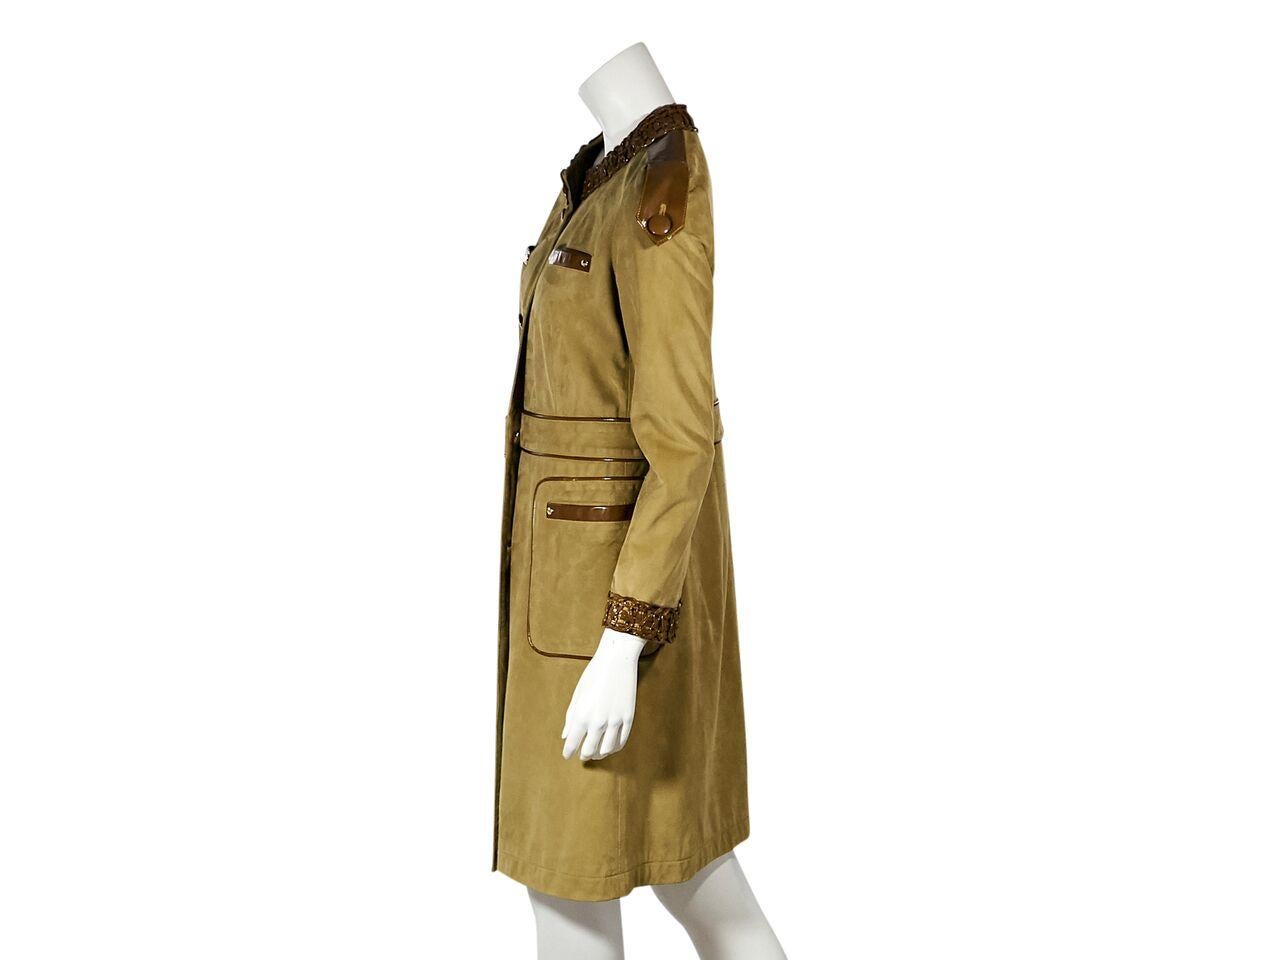 Product details:  Tan suede coat by Etro.  Trimmed with patent leather.  Button shoulder epaulettes.  Long sleeves.  Button-front closure.  Front slide pockets.  33